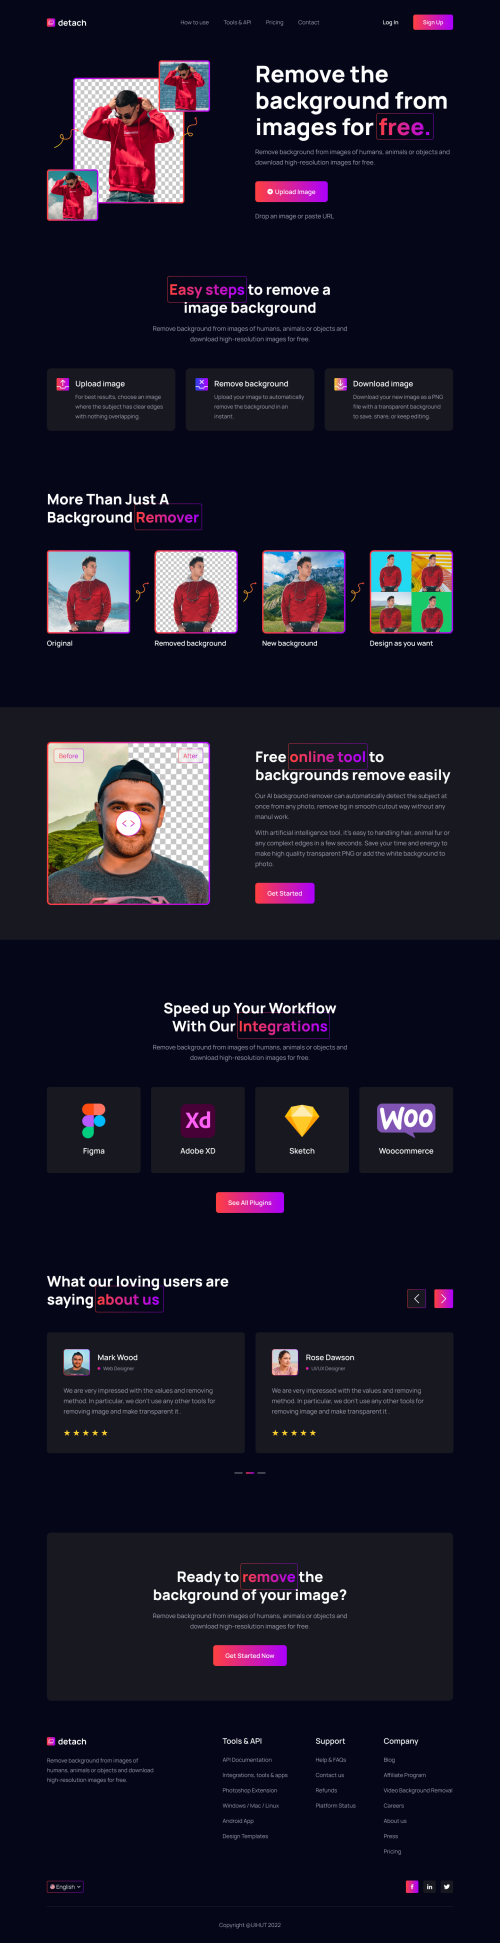 UIHut - Background Remover Website Template Free - 22199